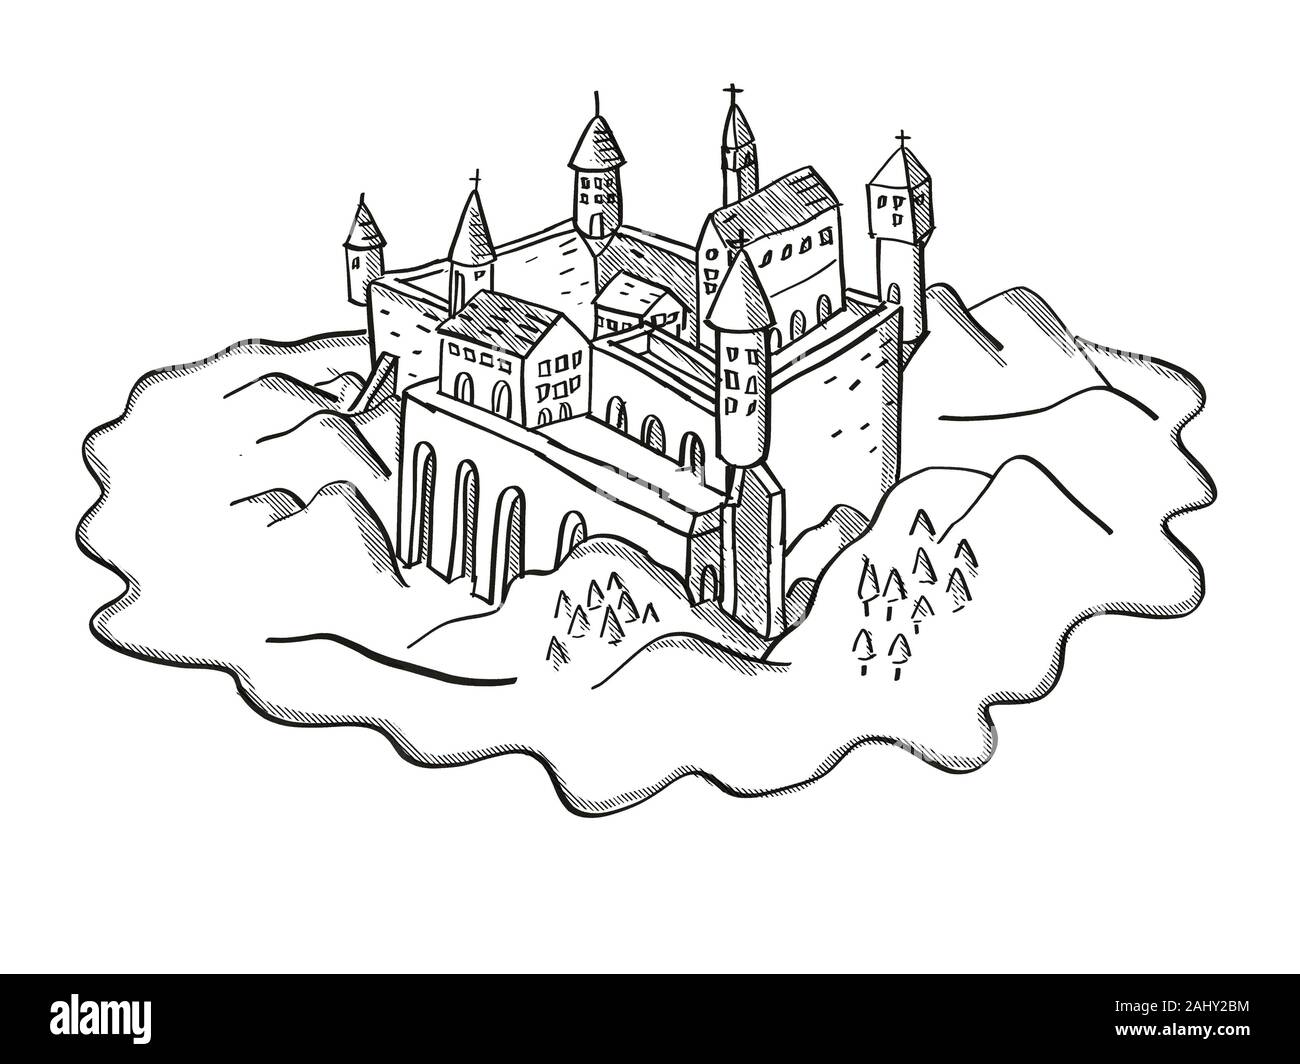 Retro cartoon style drawing of a vintage fantasy or treasure map showing a Castle or Fortress on an island on isolated white background done in black Stock Photo